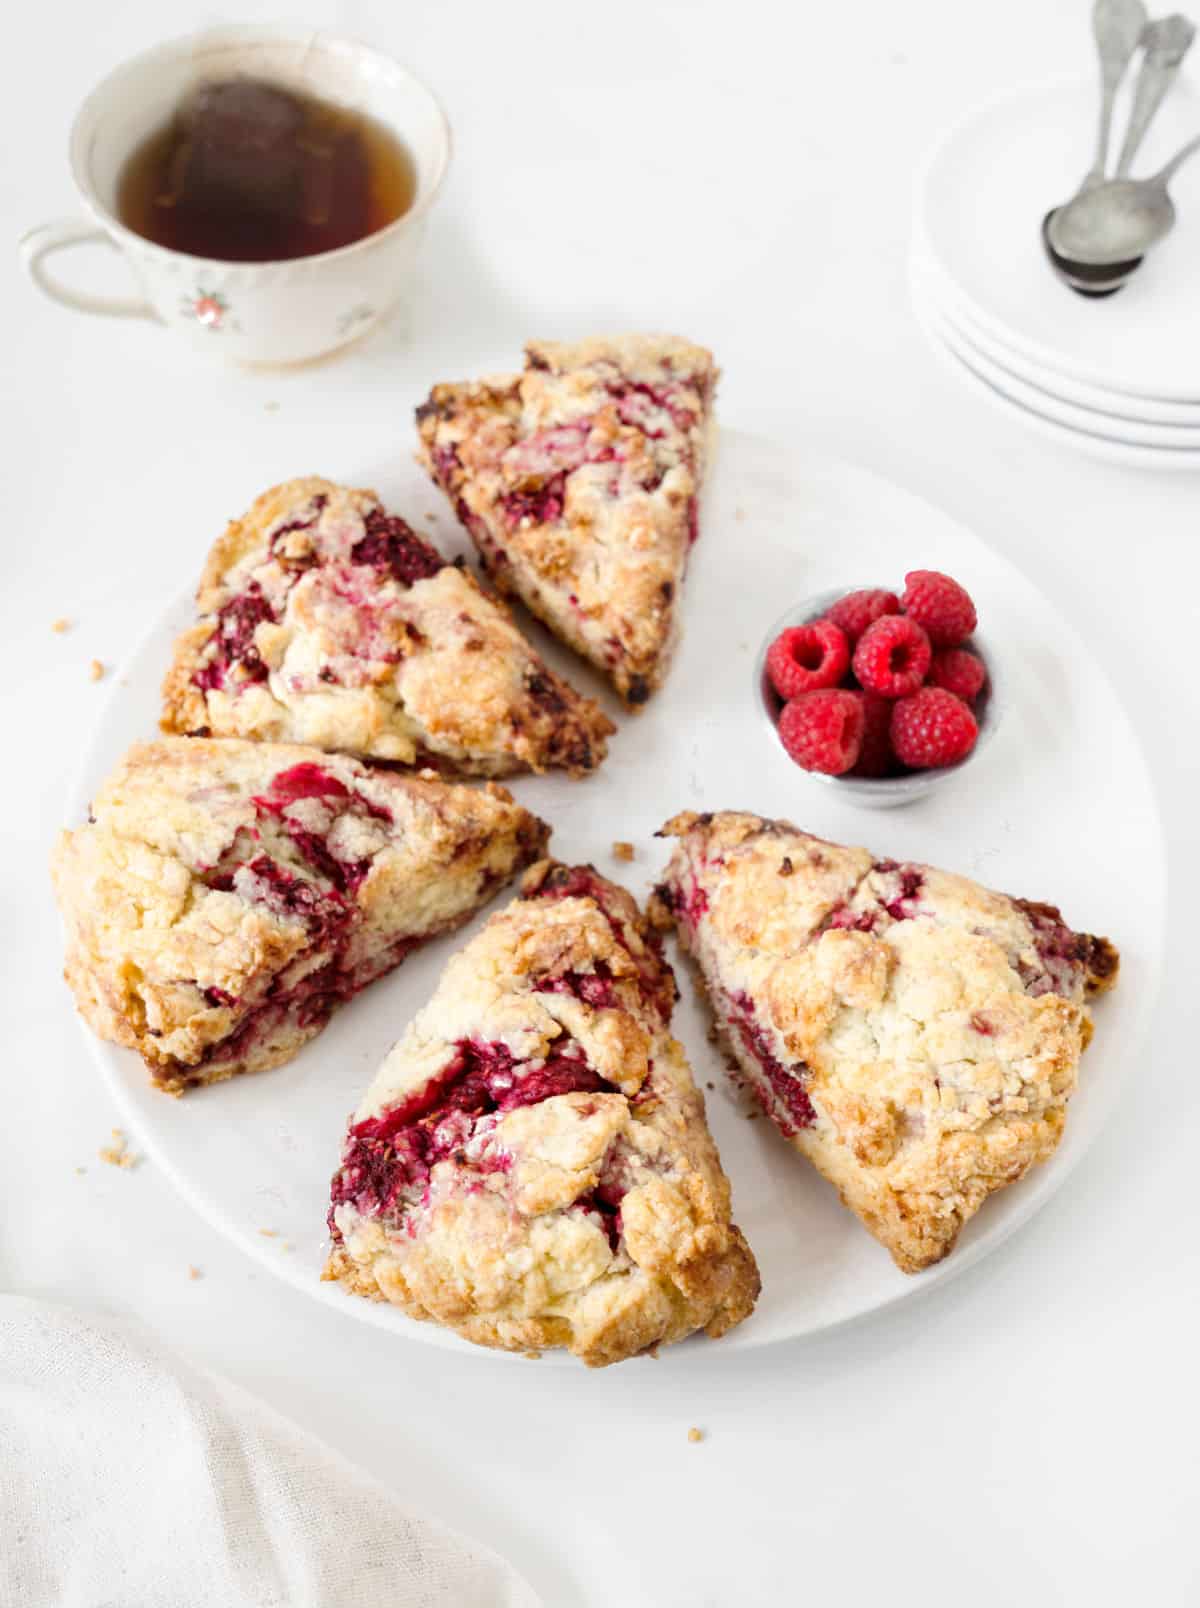 Several raspberry lemon scones on a white plate. Bowl of raspberries, cup of tea, white surface.